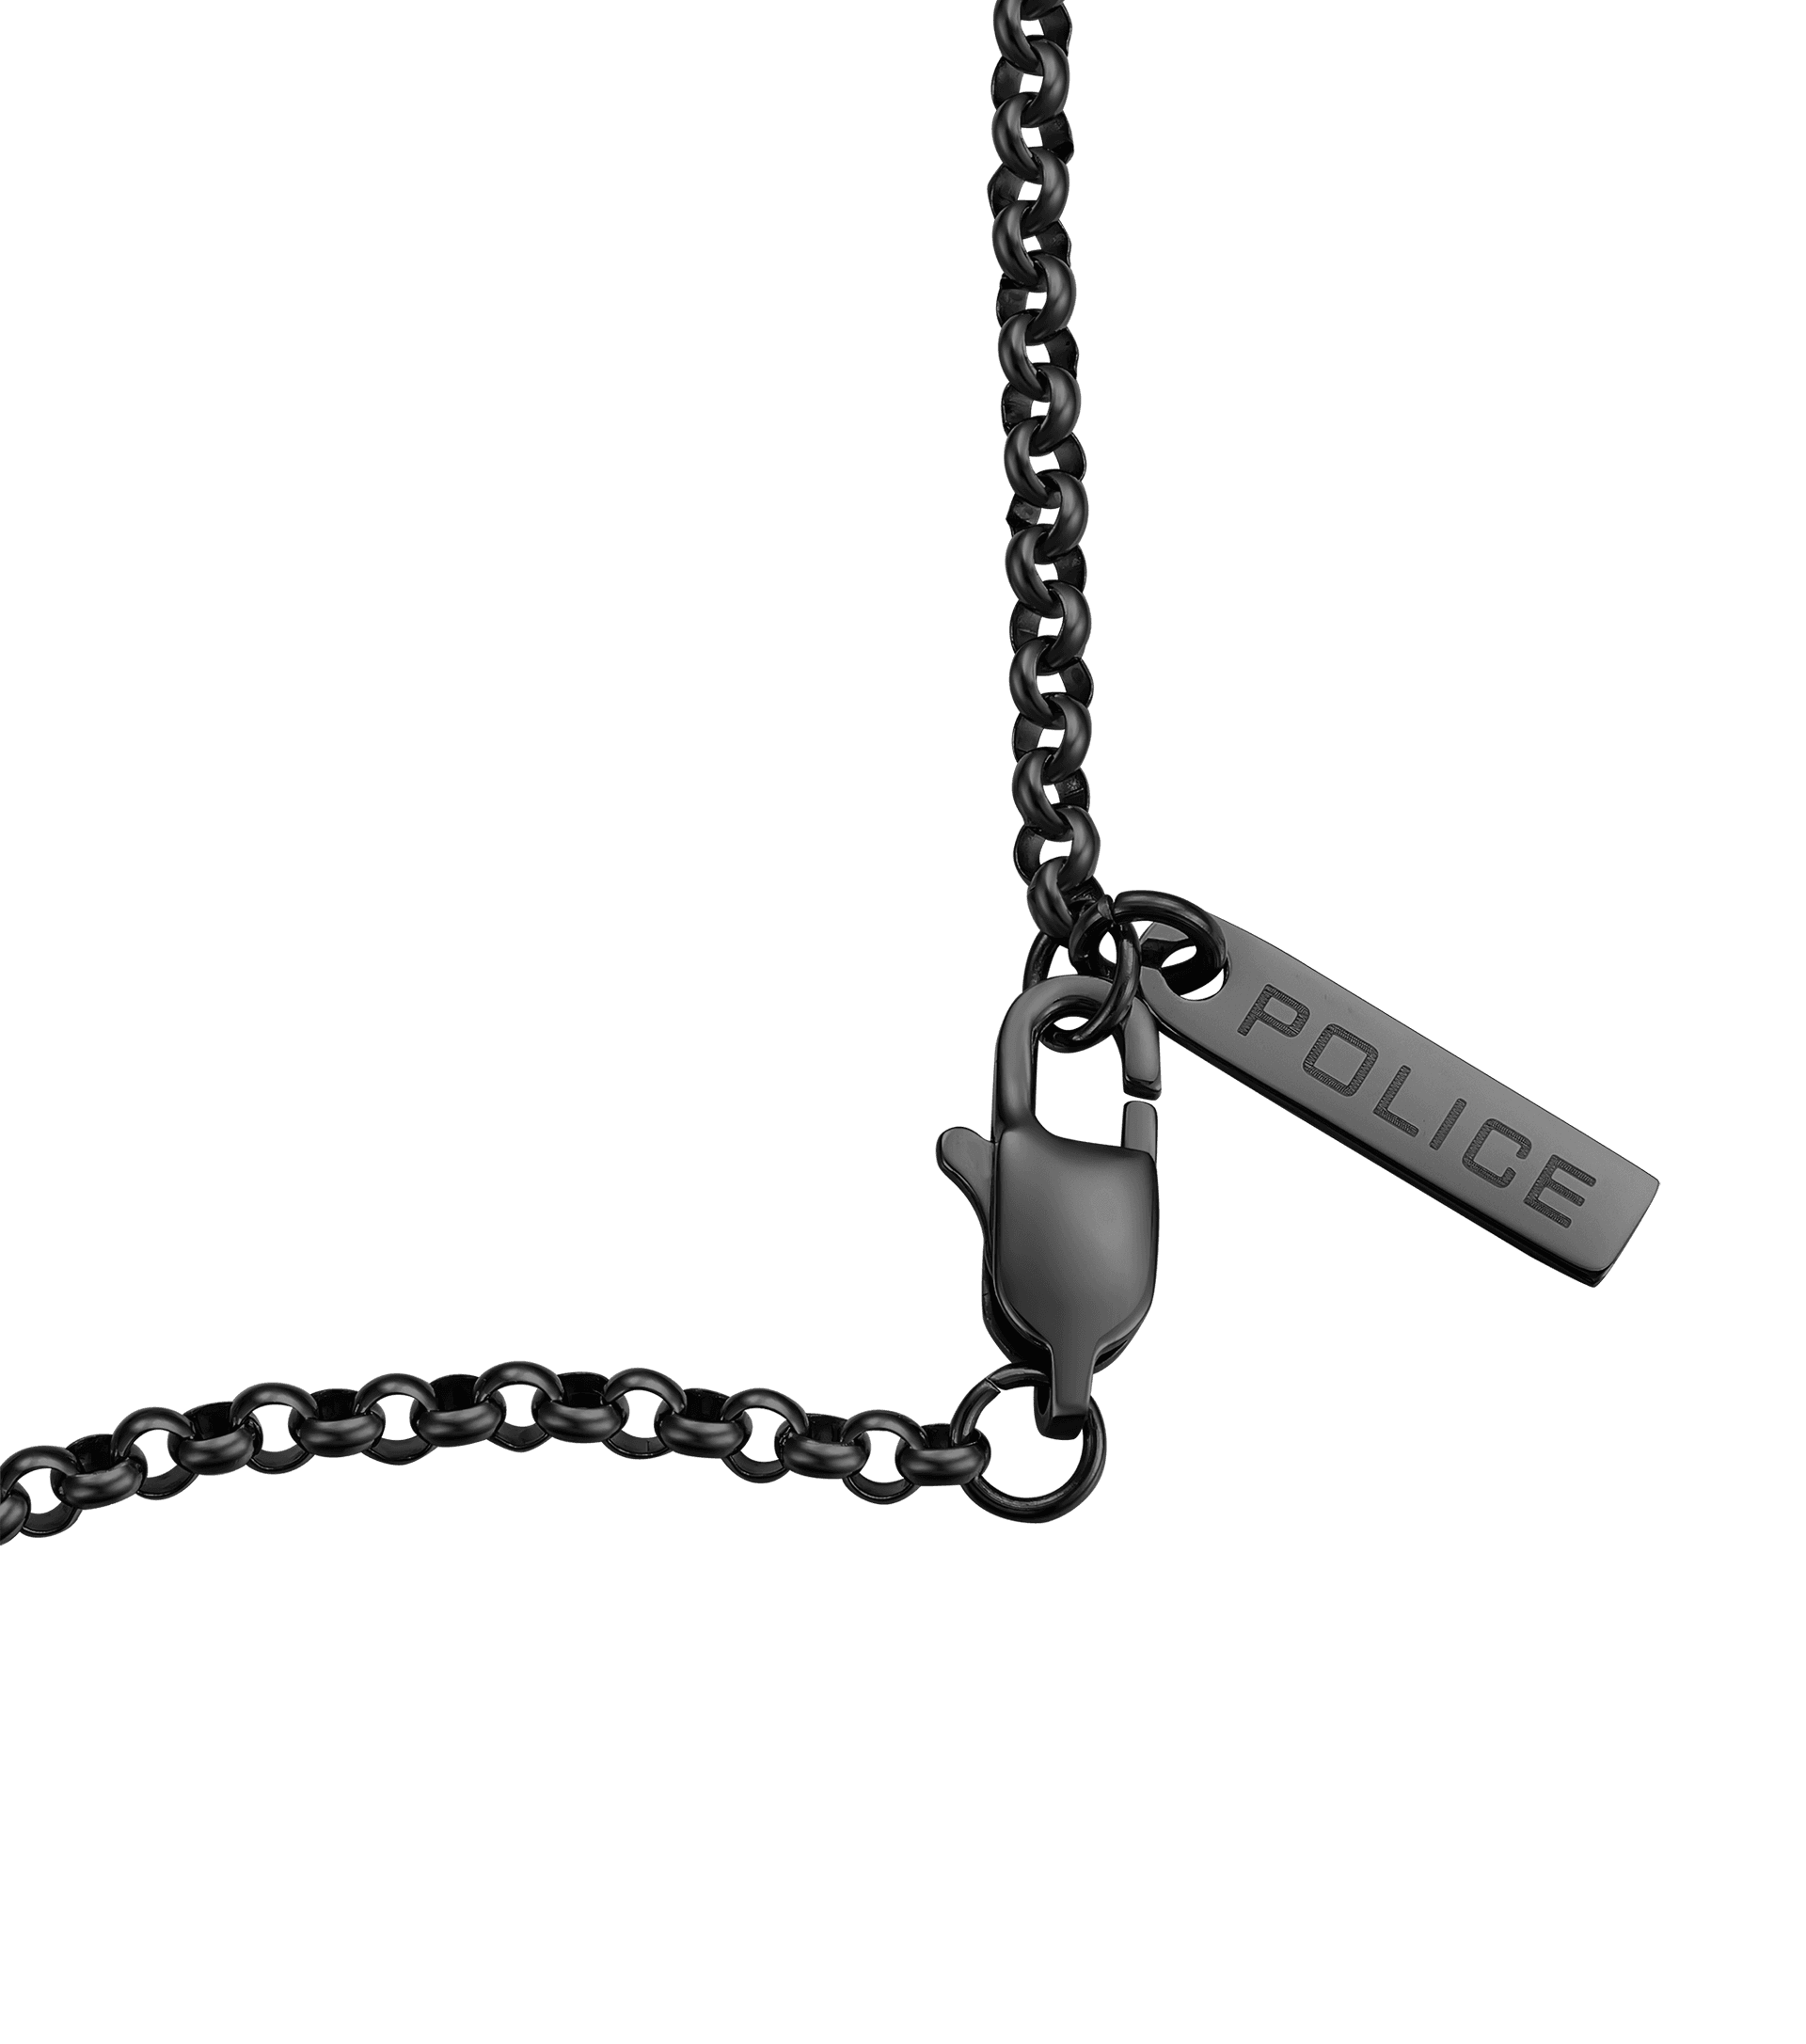 Police jewels - Tacoma II Necklace By Police For Men PEAGN0010601